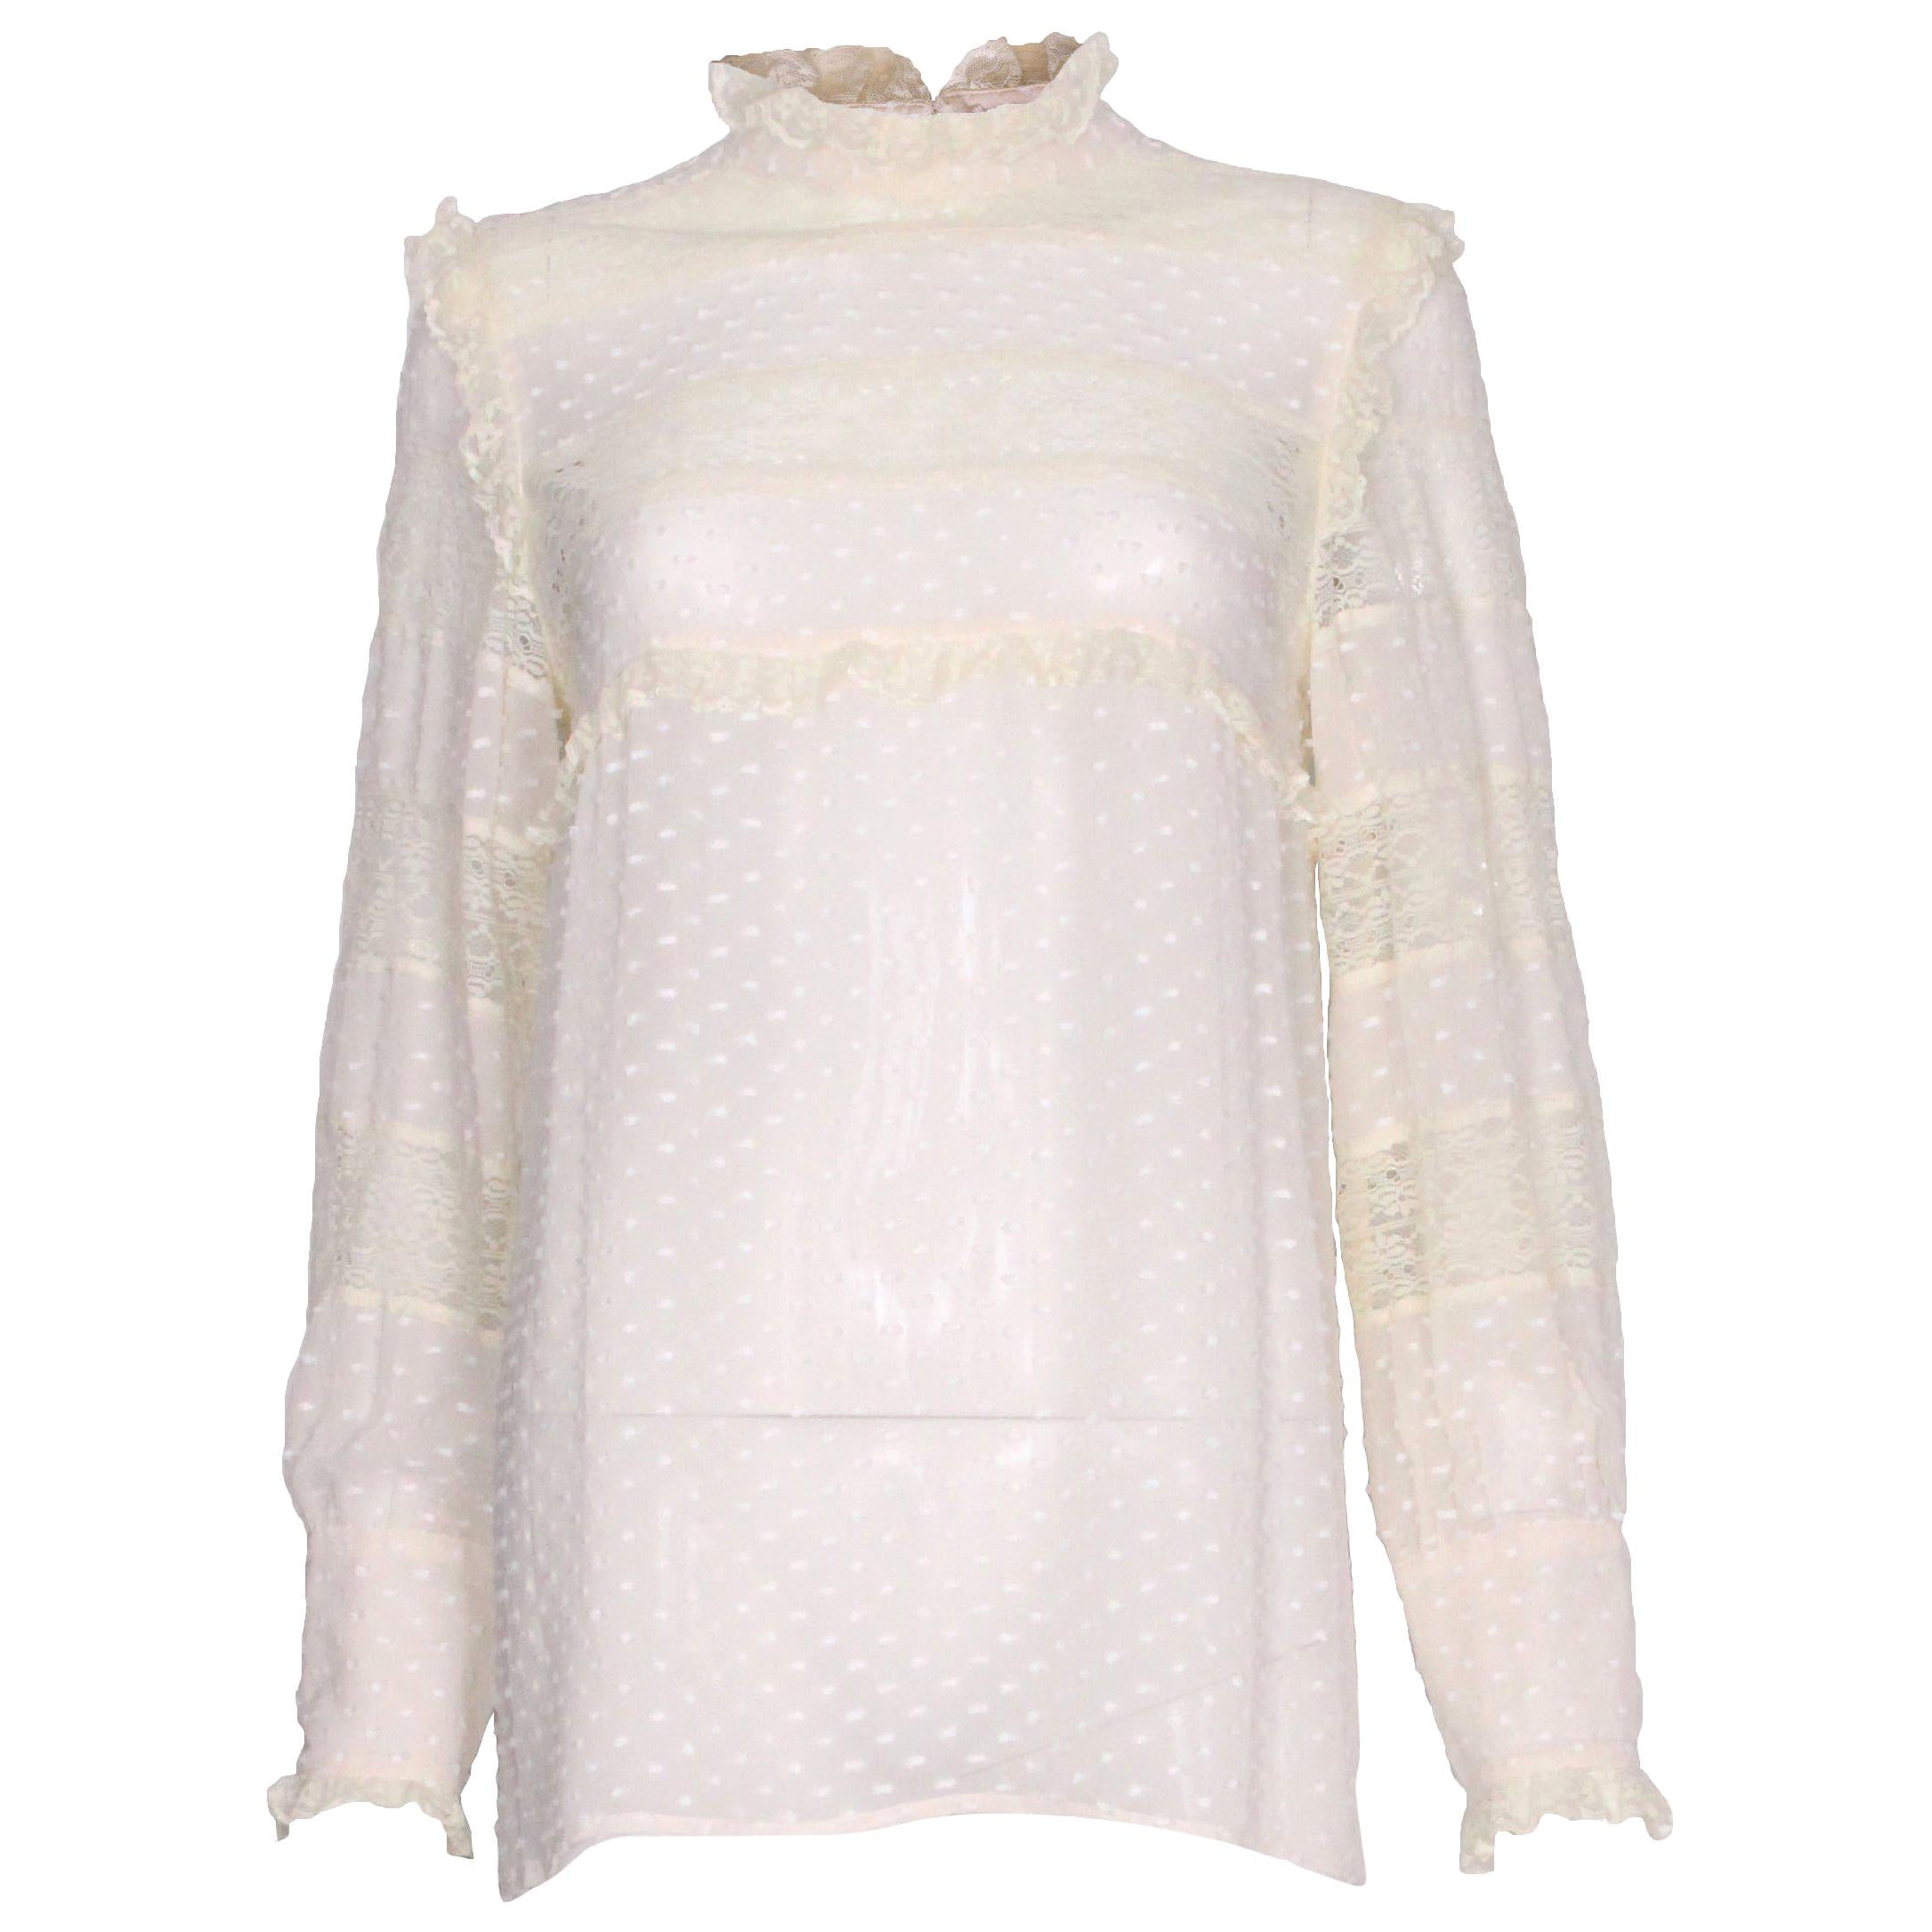 A vintage 1990s Valentino Silk and Lace Blouse